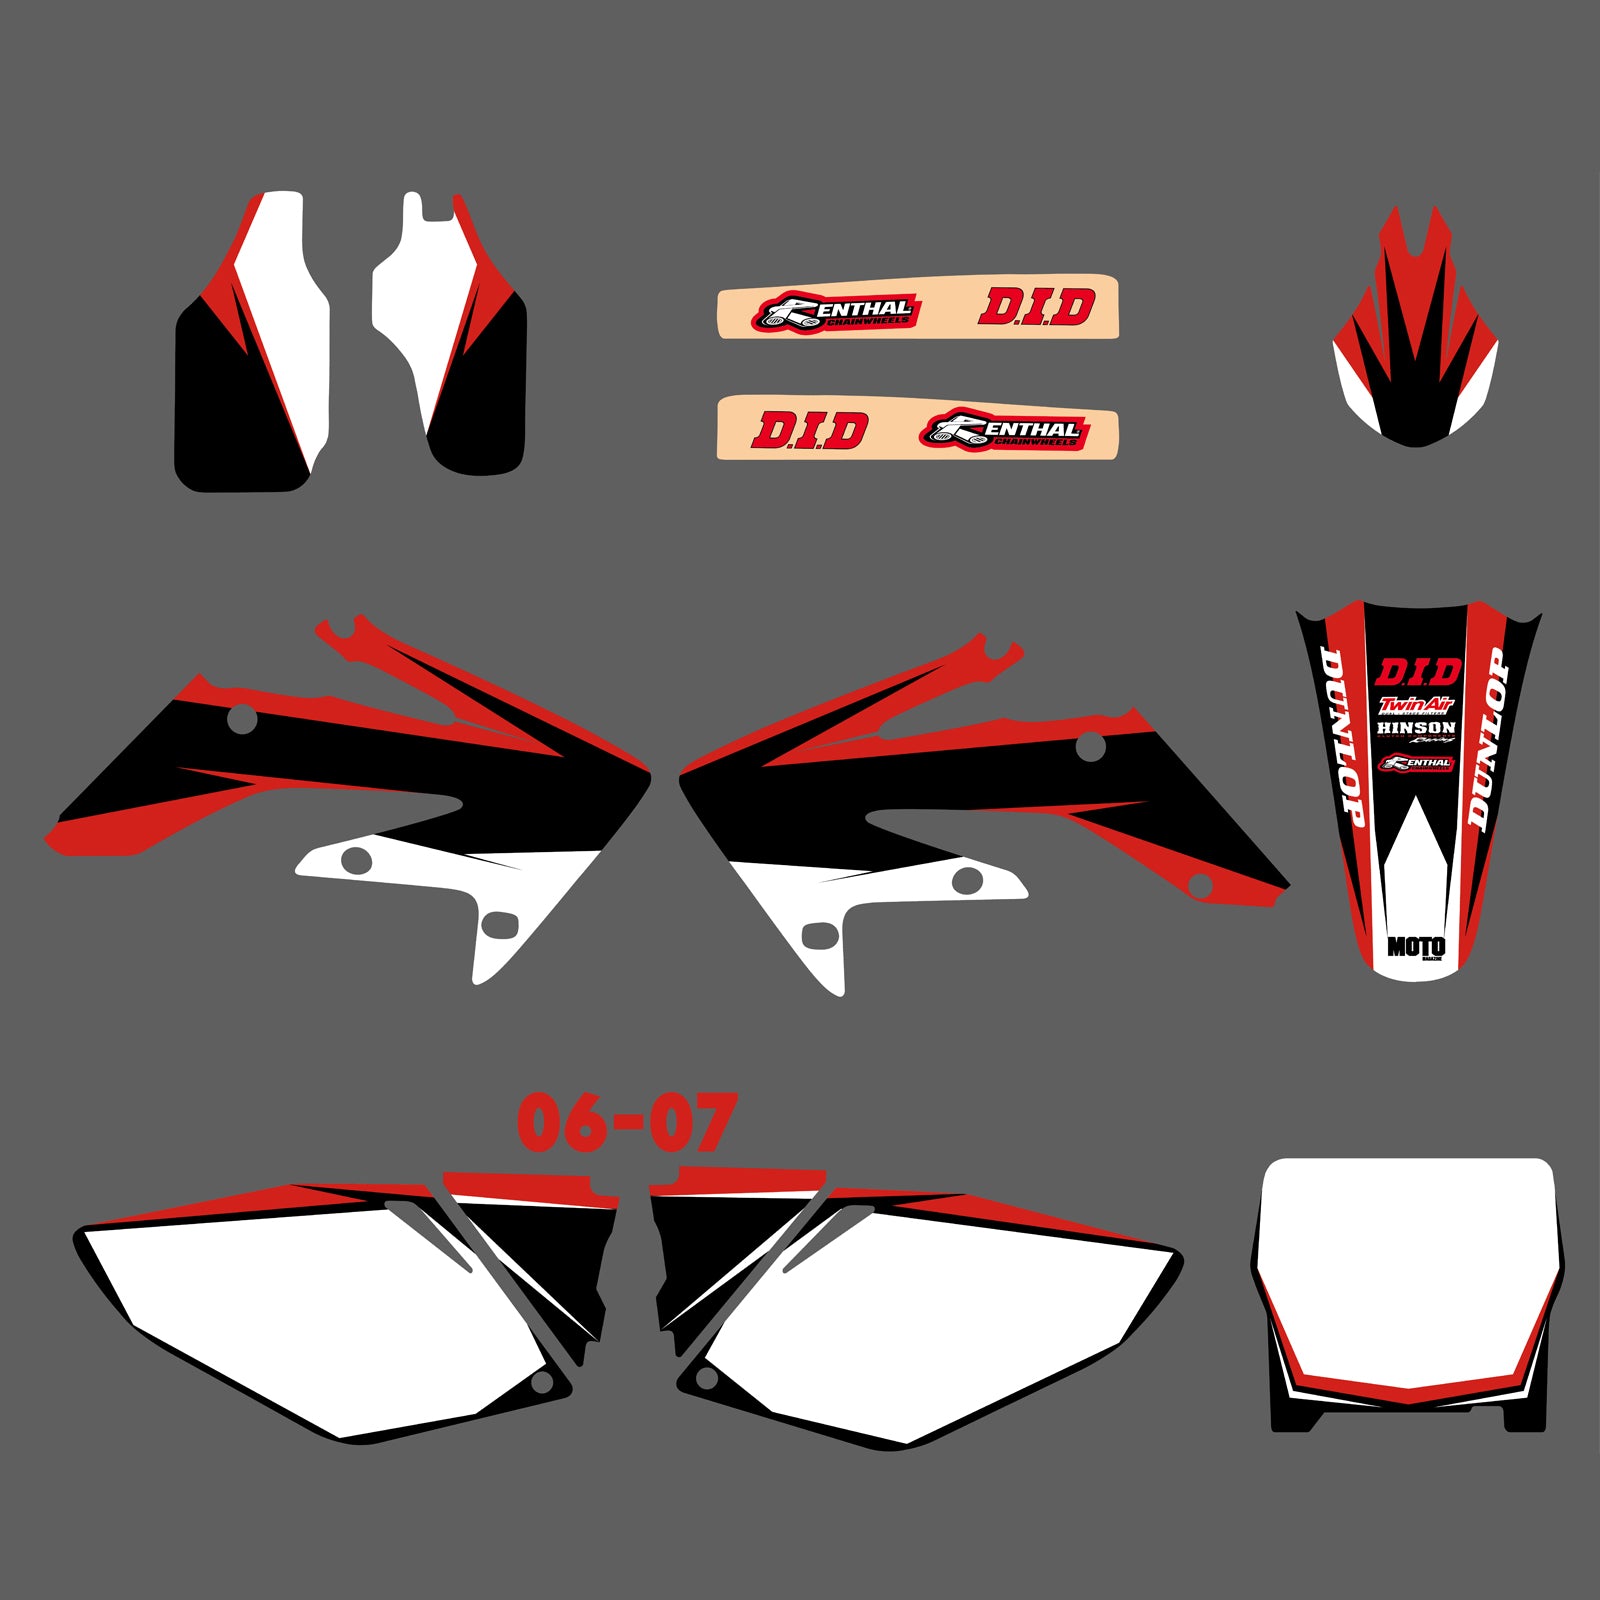 Motorcycle Team Graphics Backgrounds Decals Stickers For HONDA CRF250 2006-2007